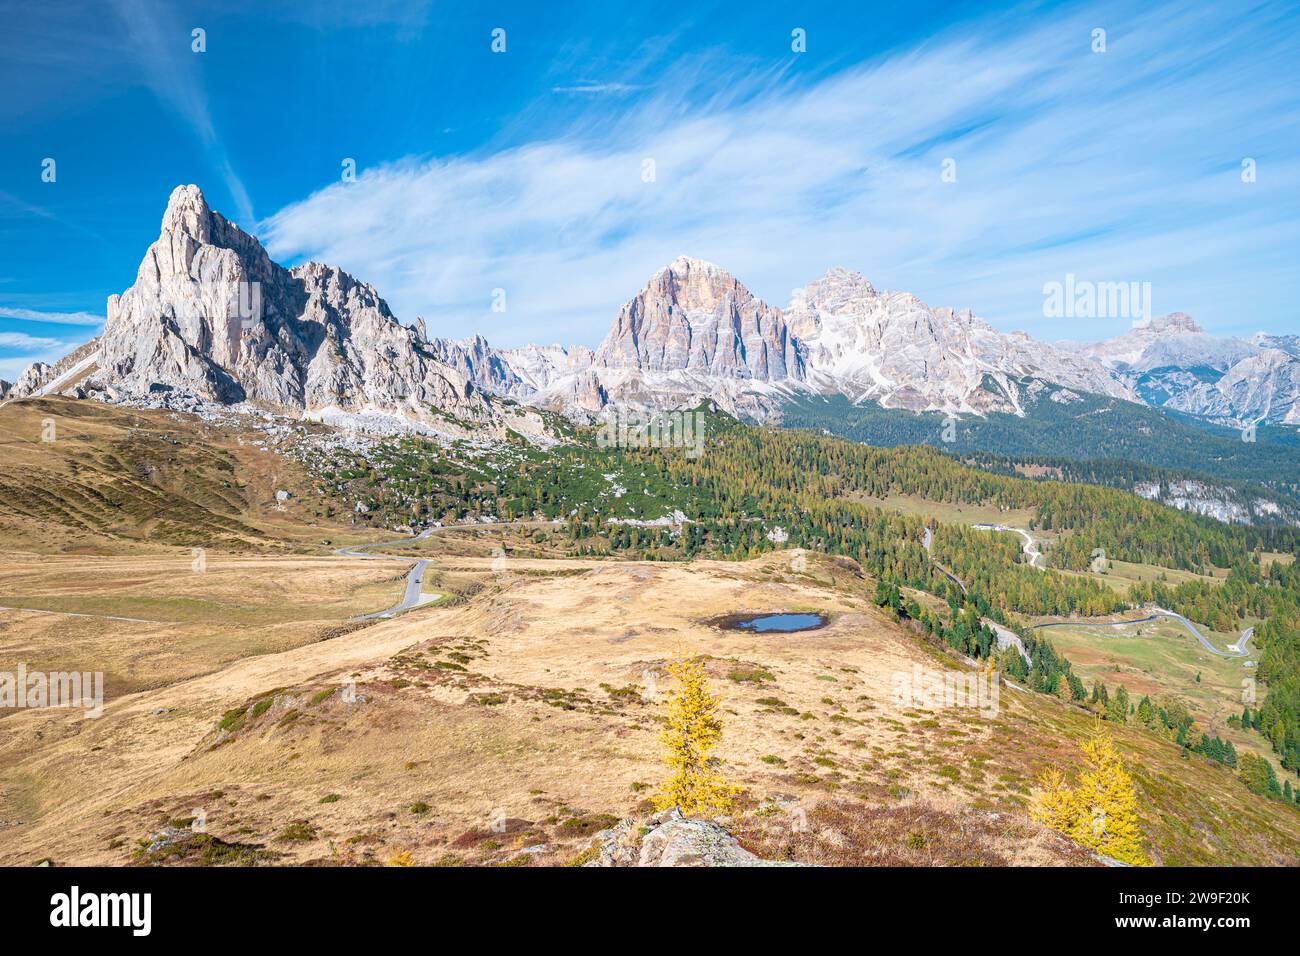 Majestic mountain landscape as viewed from near Passo Giau, Dolomites, Italy. Stock Photo